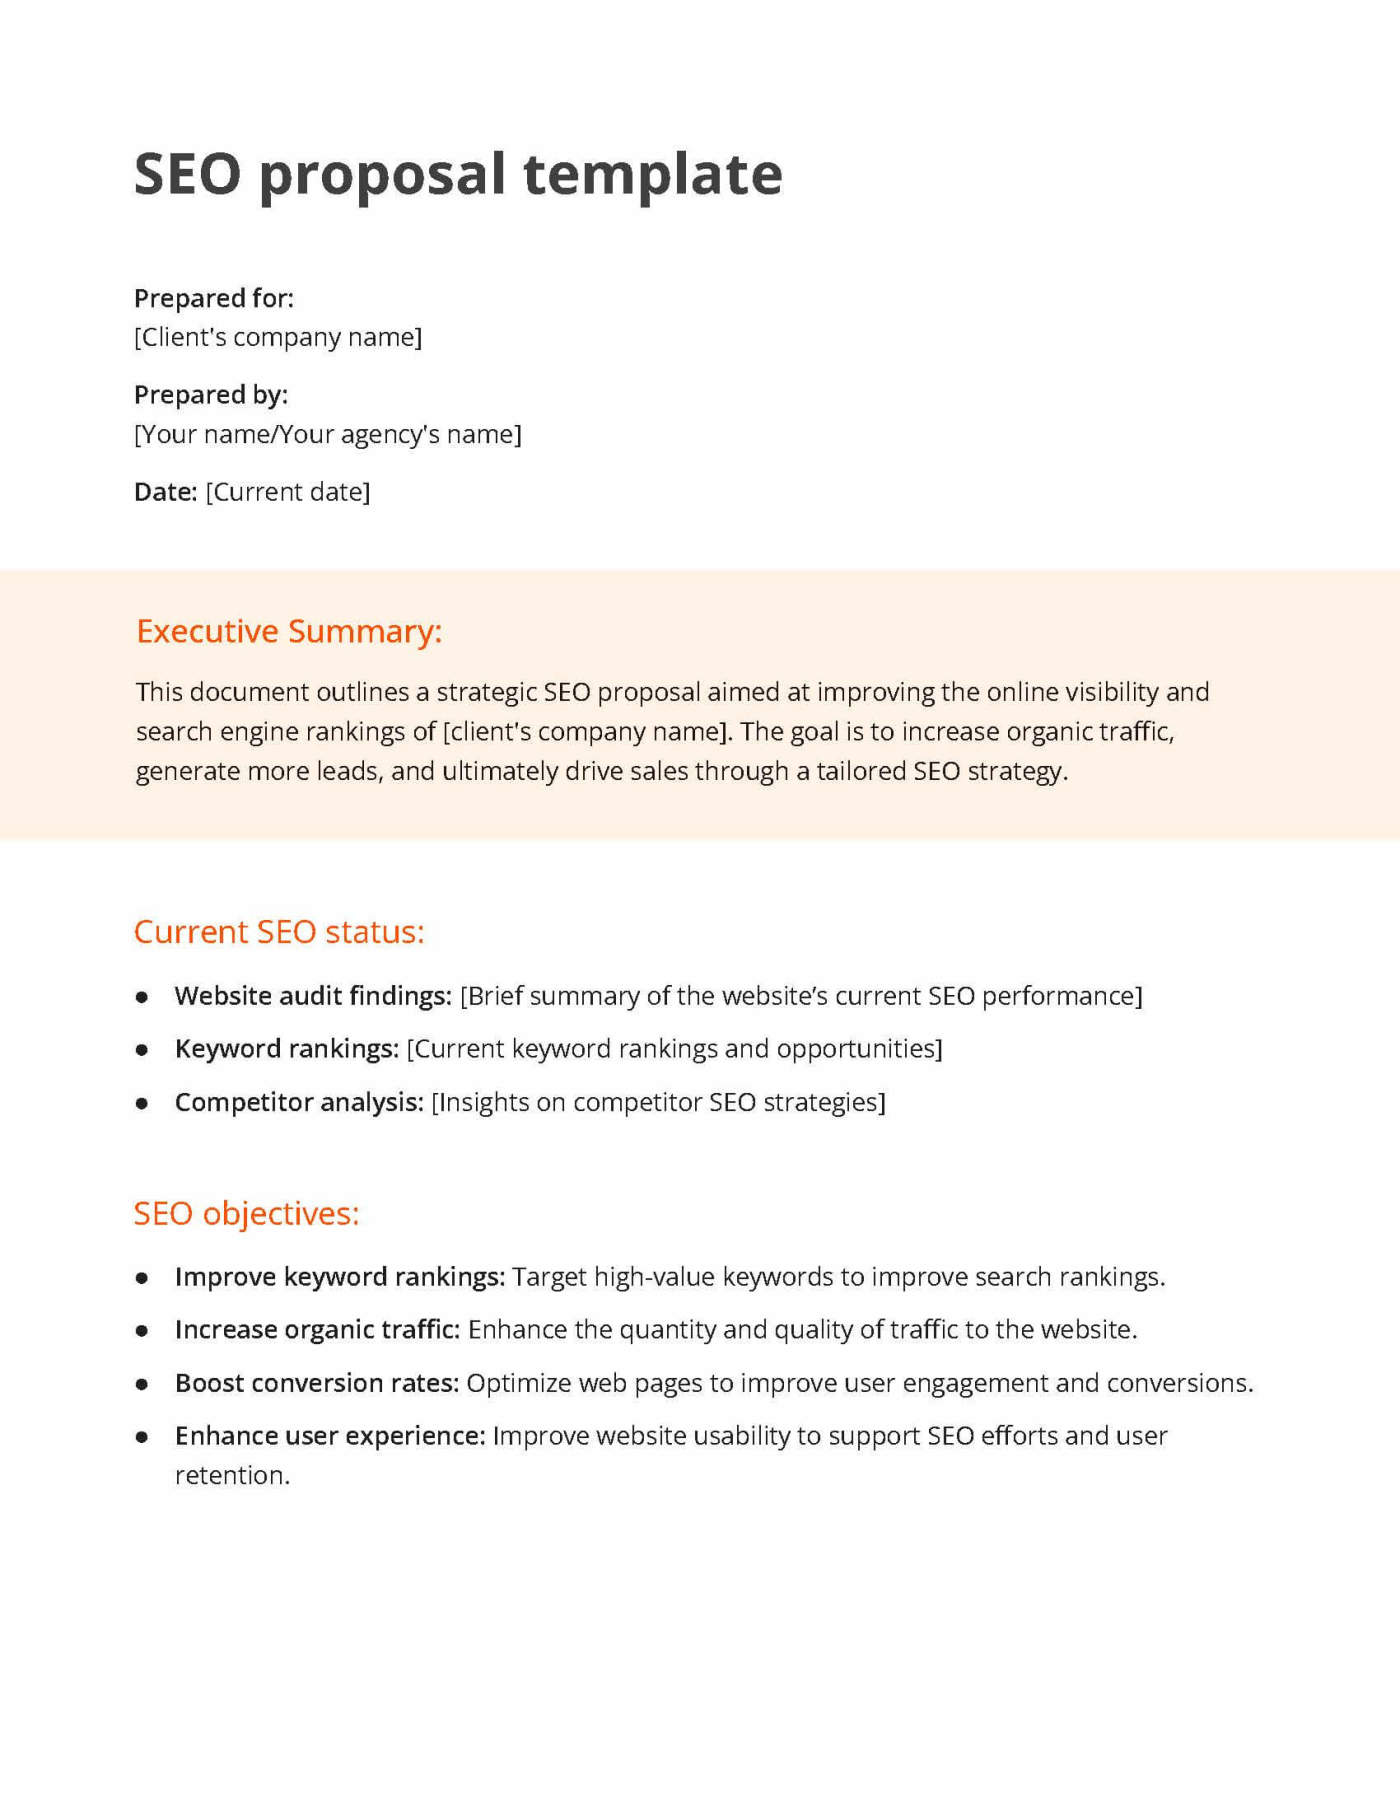 White and orange contract proposal template including a section for the executive summary, current SEO status, and SEO objectives